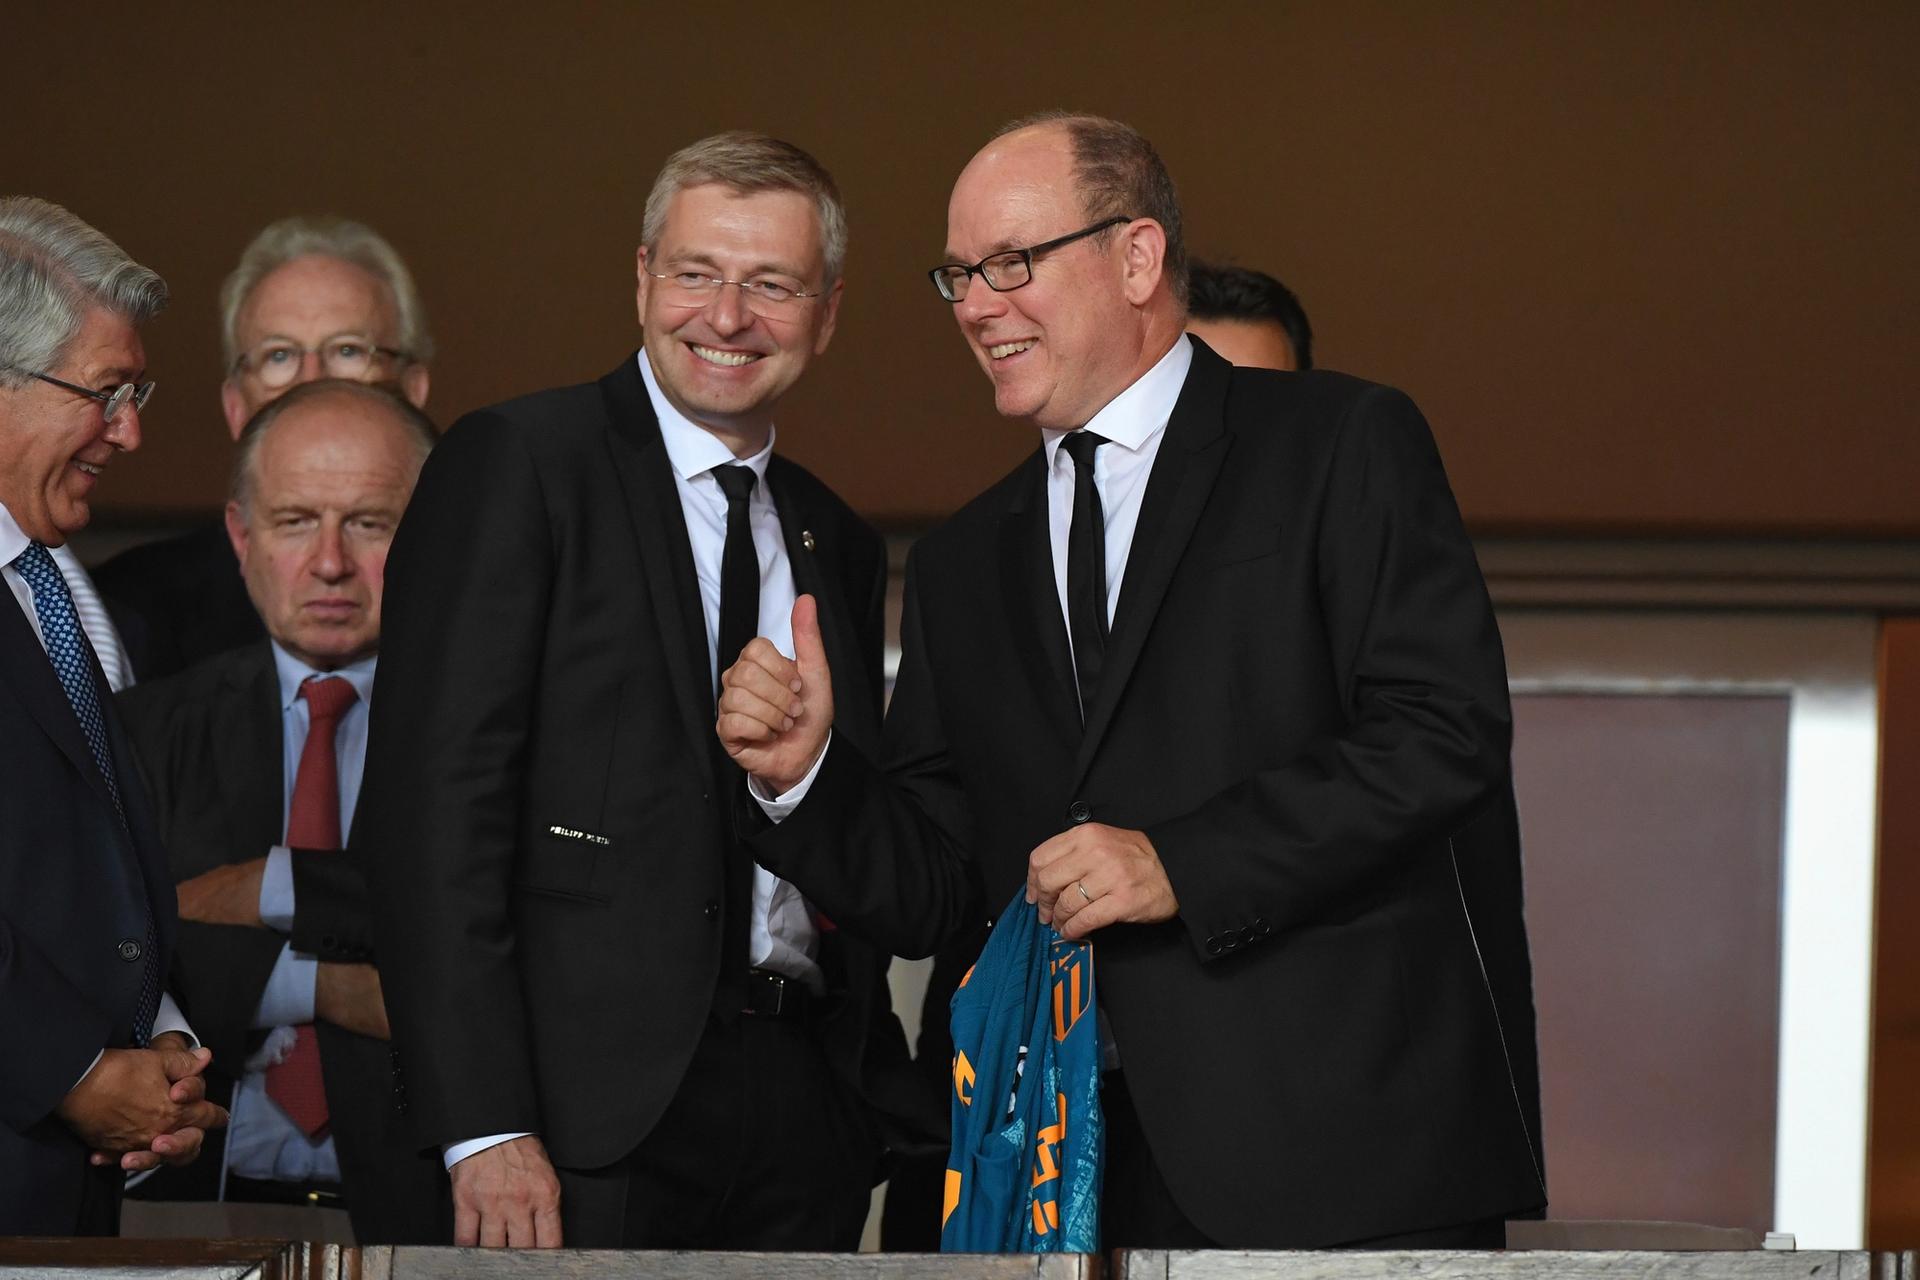 Dmitri Rybolovlev with Prince Albert II of Monaco at a football match between AS Monaco FC, which Rybolovlev owns, and Atlético de Madrid Photo by Lionel Urman/Sipa USA